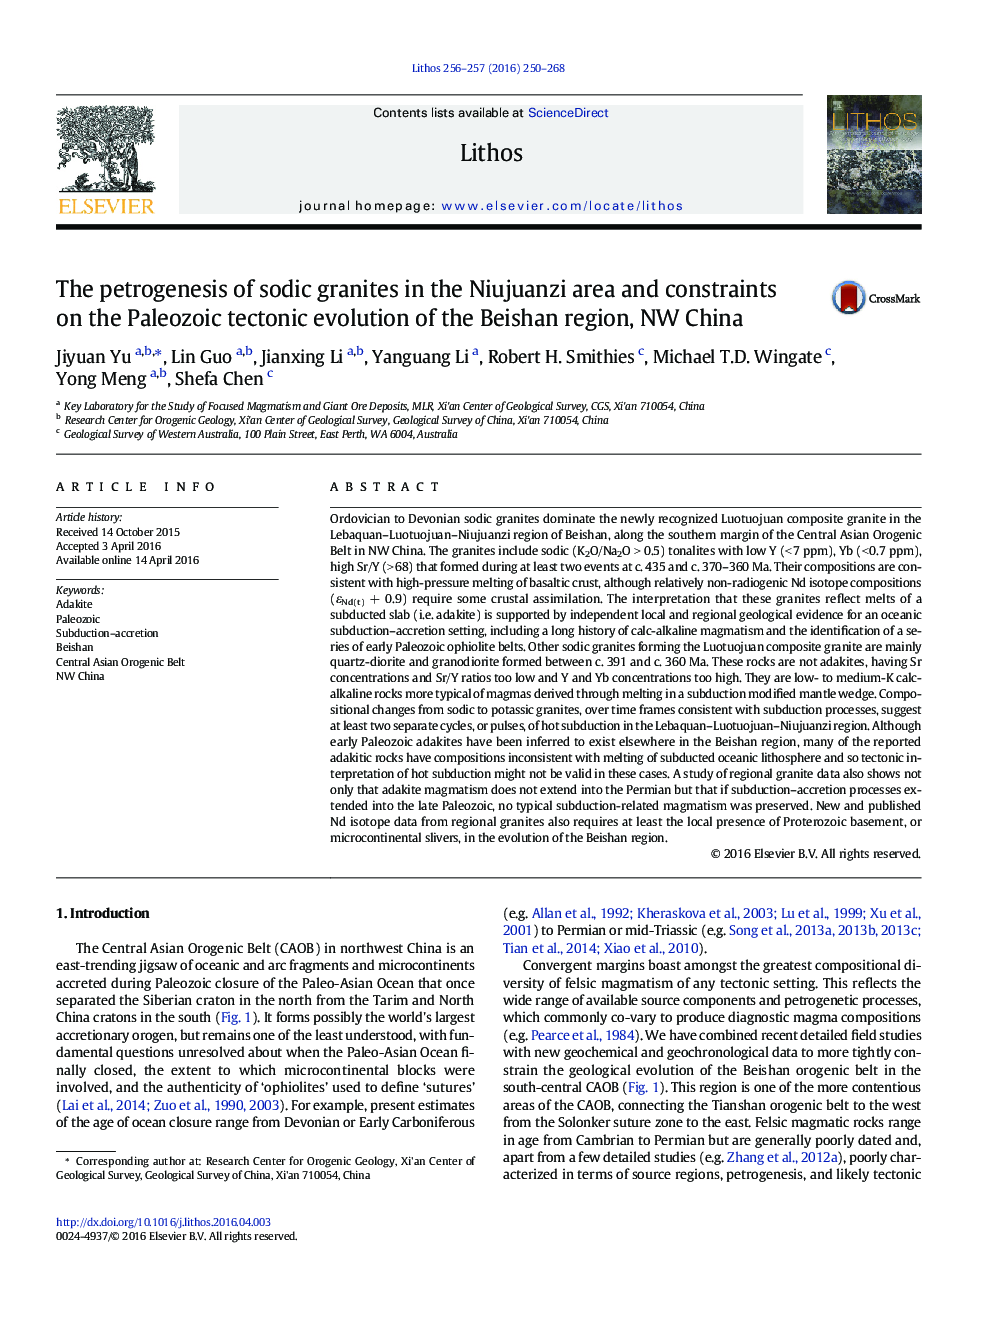 The petrogenesis of sodic granites in the Niujuanzi area and constraints on the Paleozoic tectonic evolution of the Beishan region, NW China